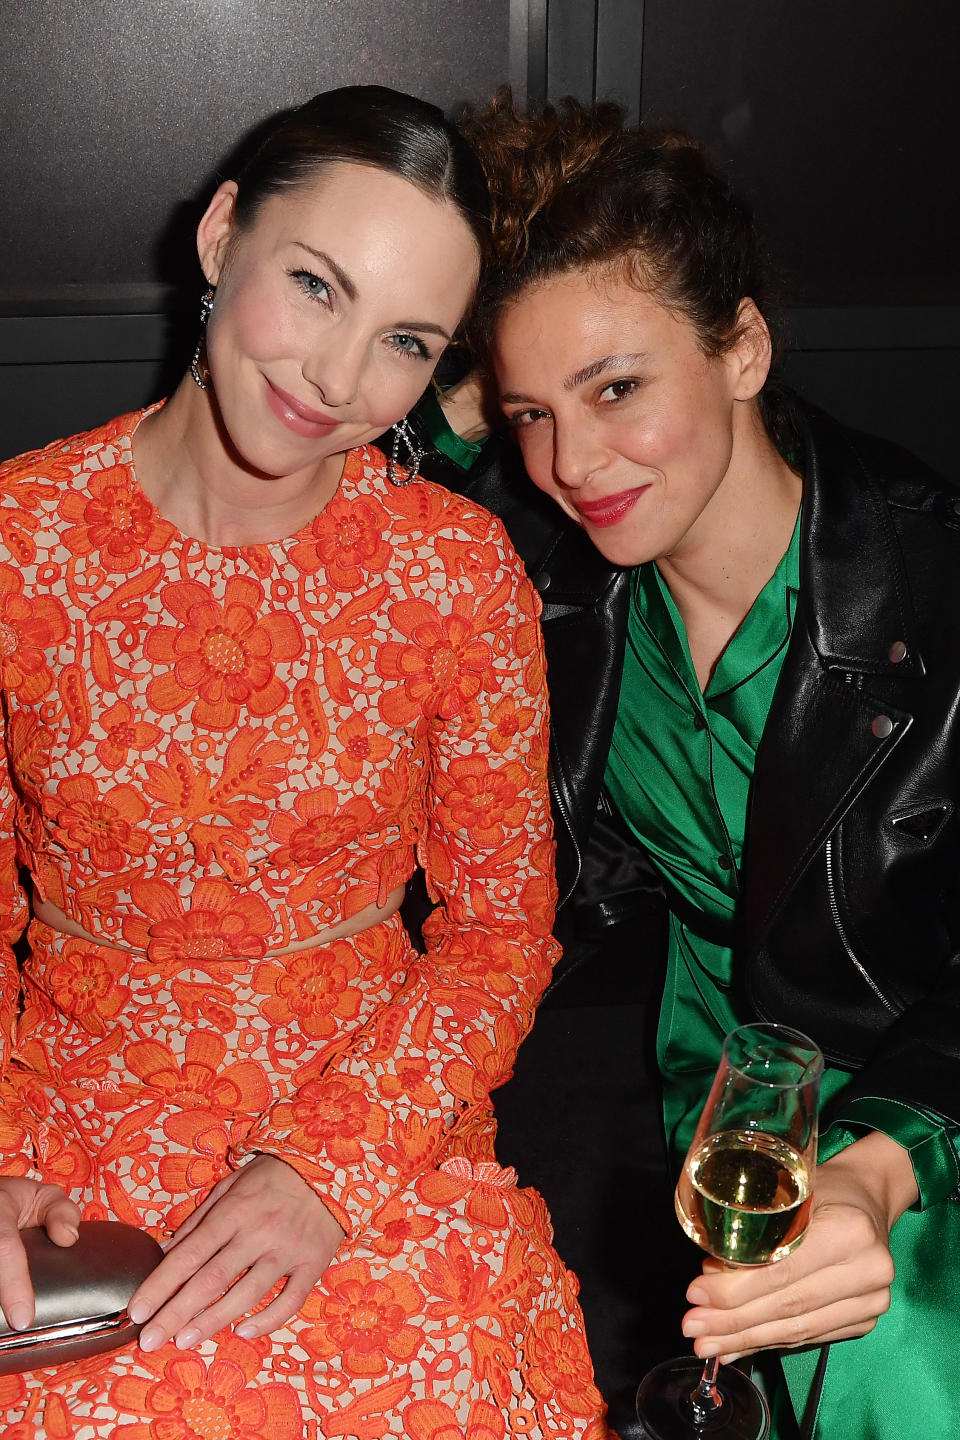 Jasmine Trinca and Helle Bendixen attend The Sound of Prada on May 25, 2022. - Credit: Getty Images for Prada